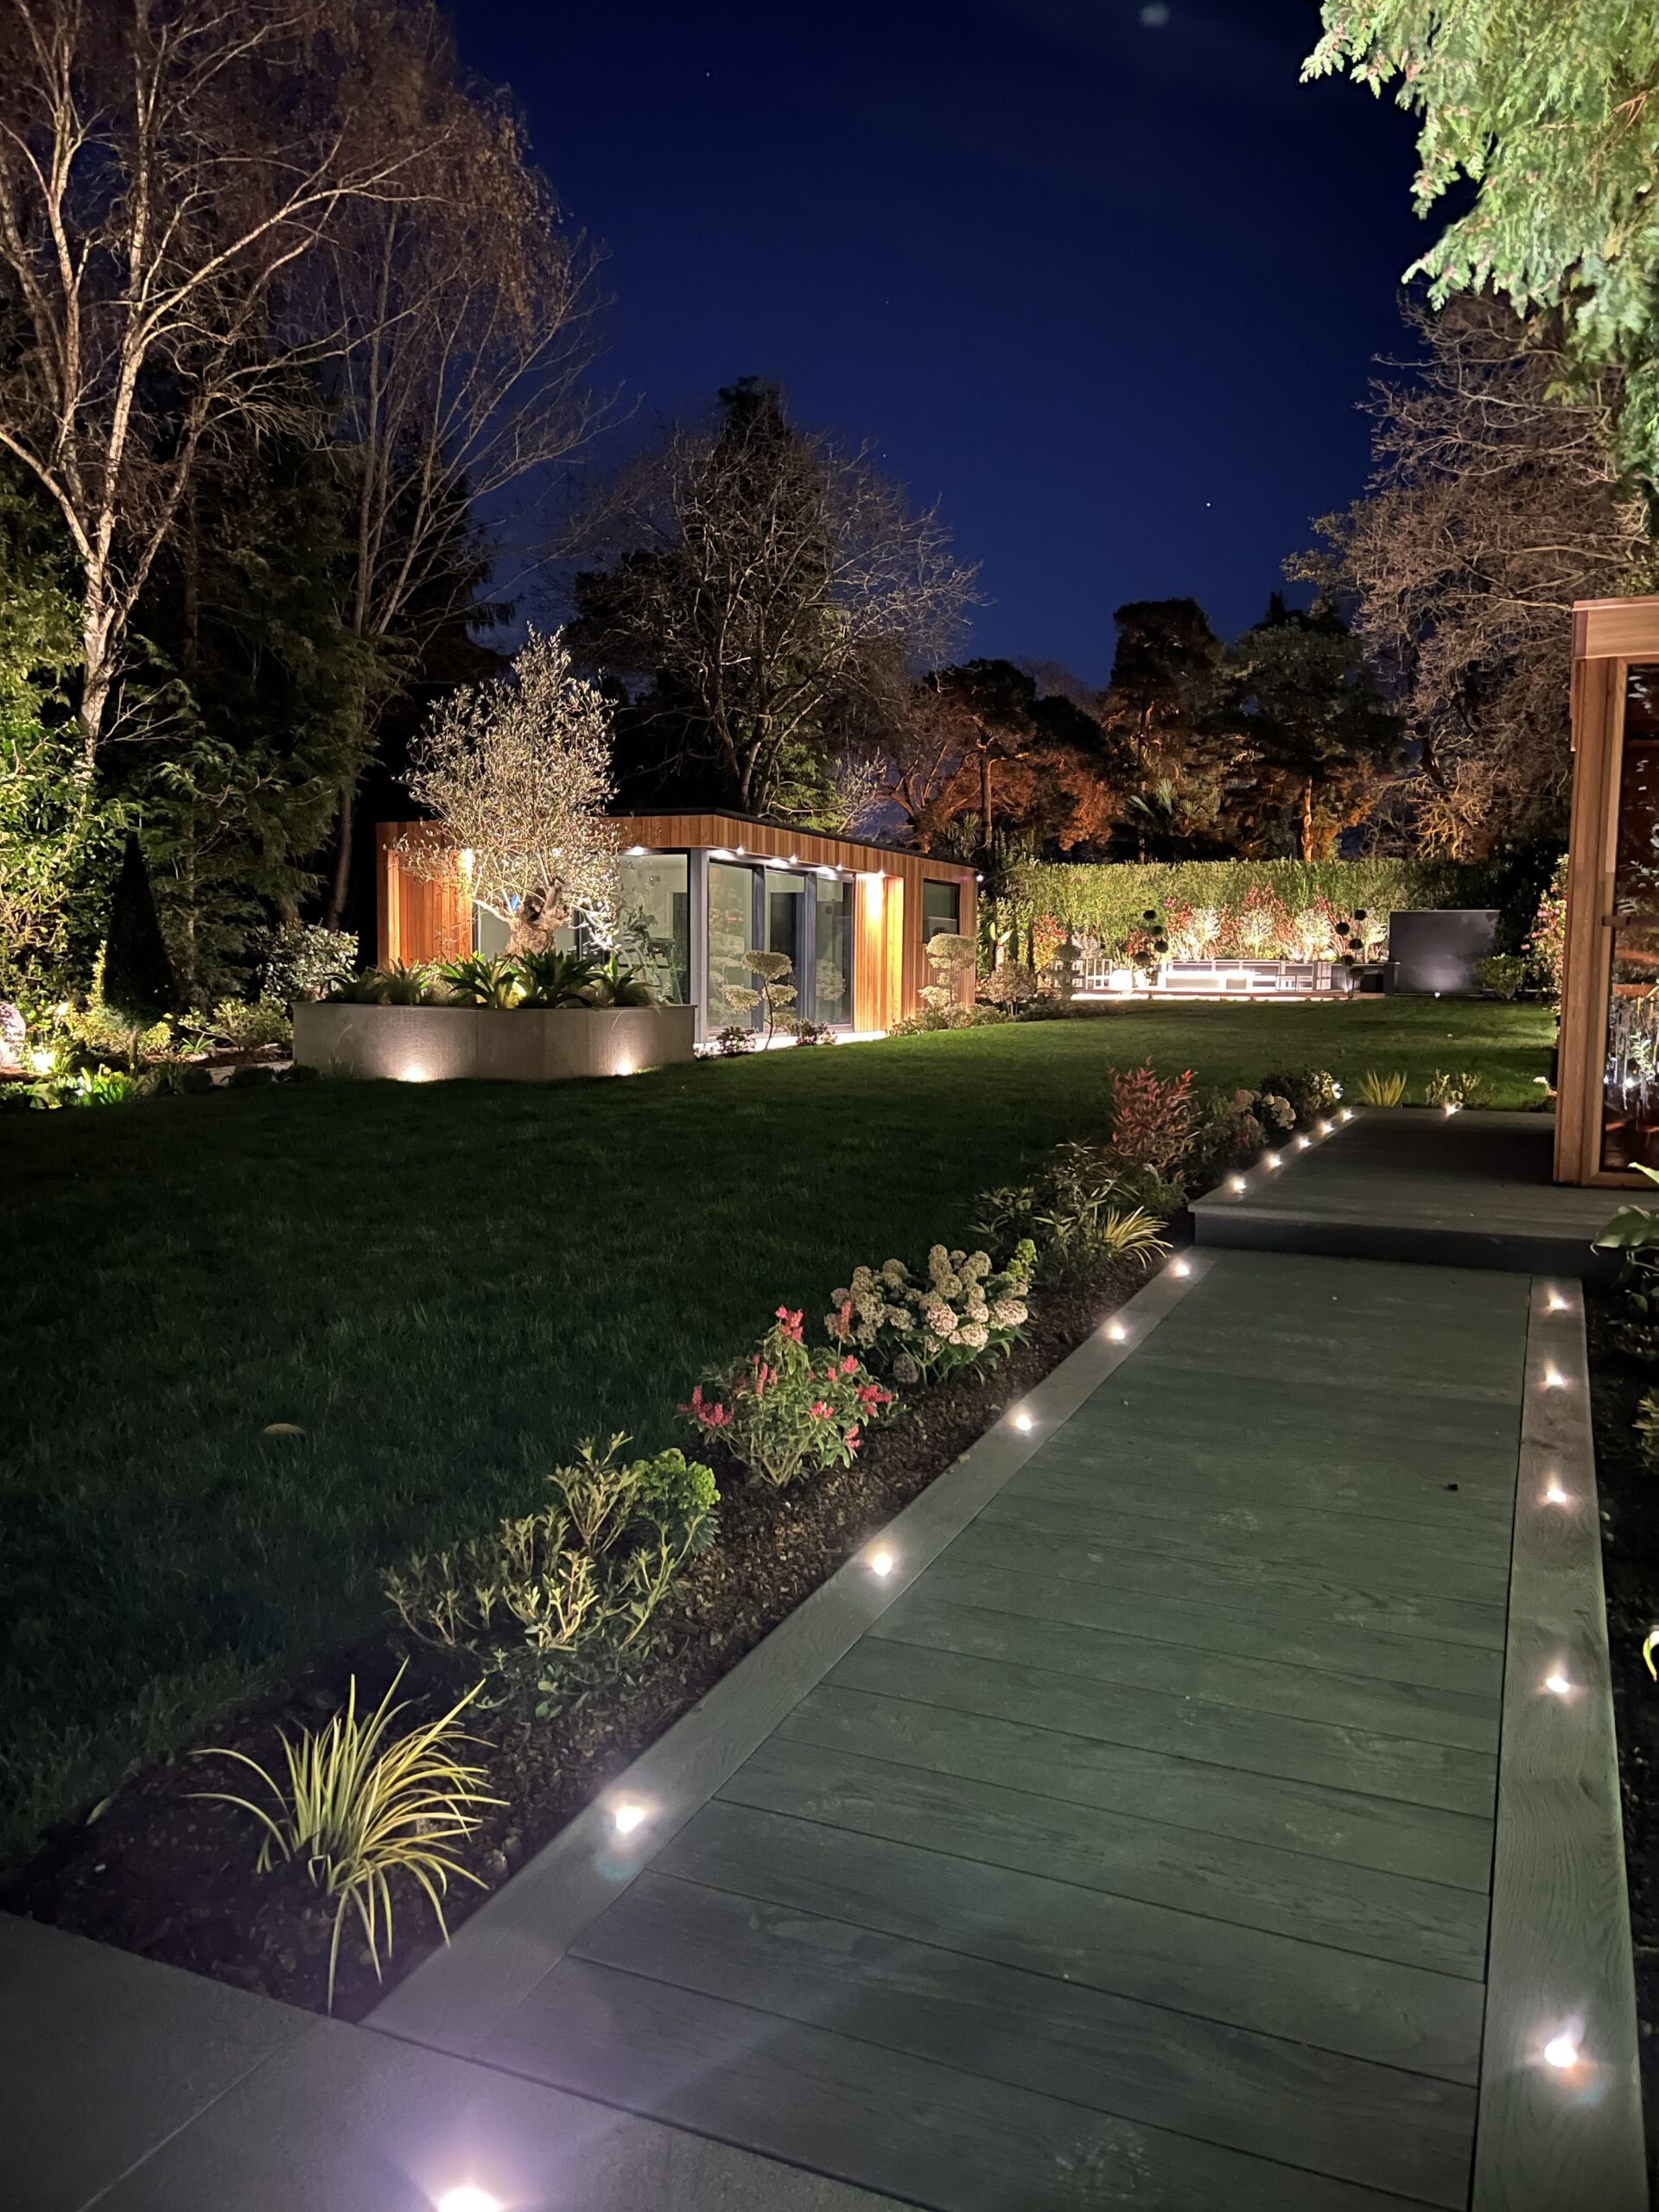 Exterior night view of a wood walkway in a garden leading up to a Vivid Green garden studio with cedar cladding a grey door and in the background across the garden to the right a smaller garden studio with a connected patio and furniture